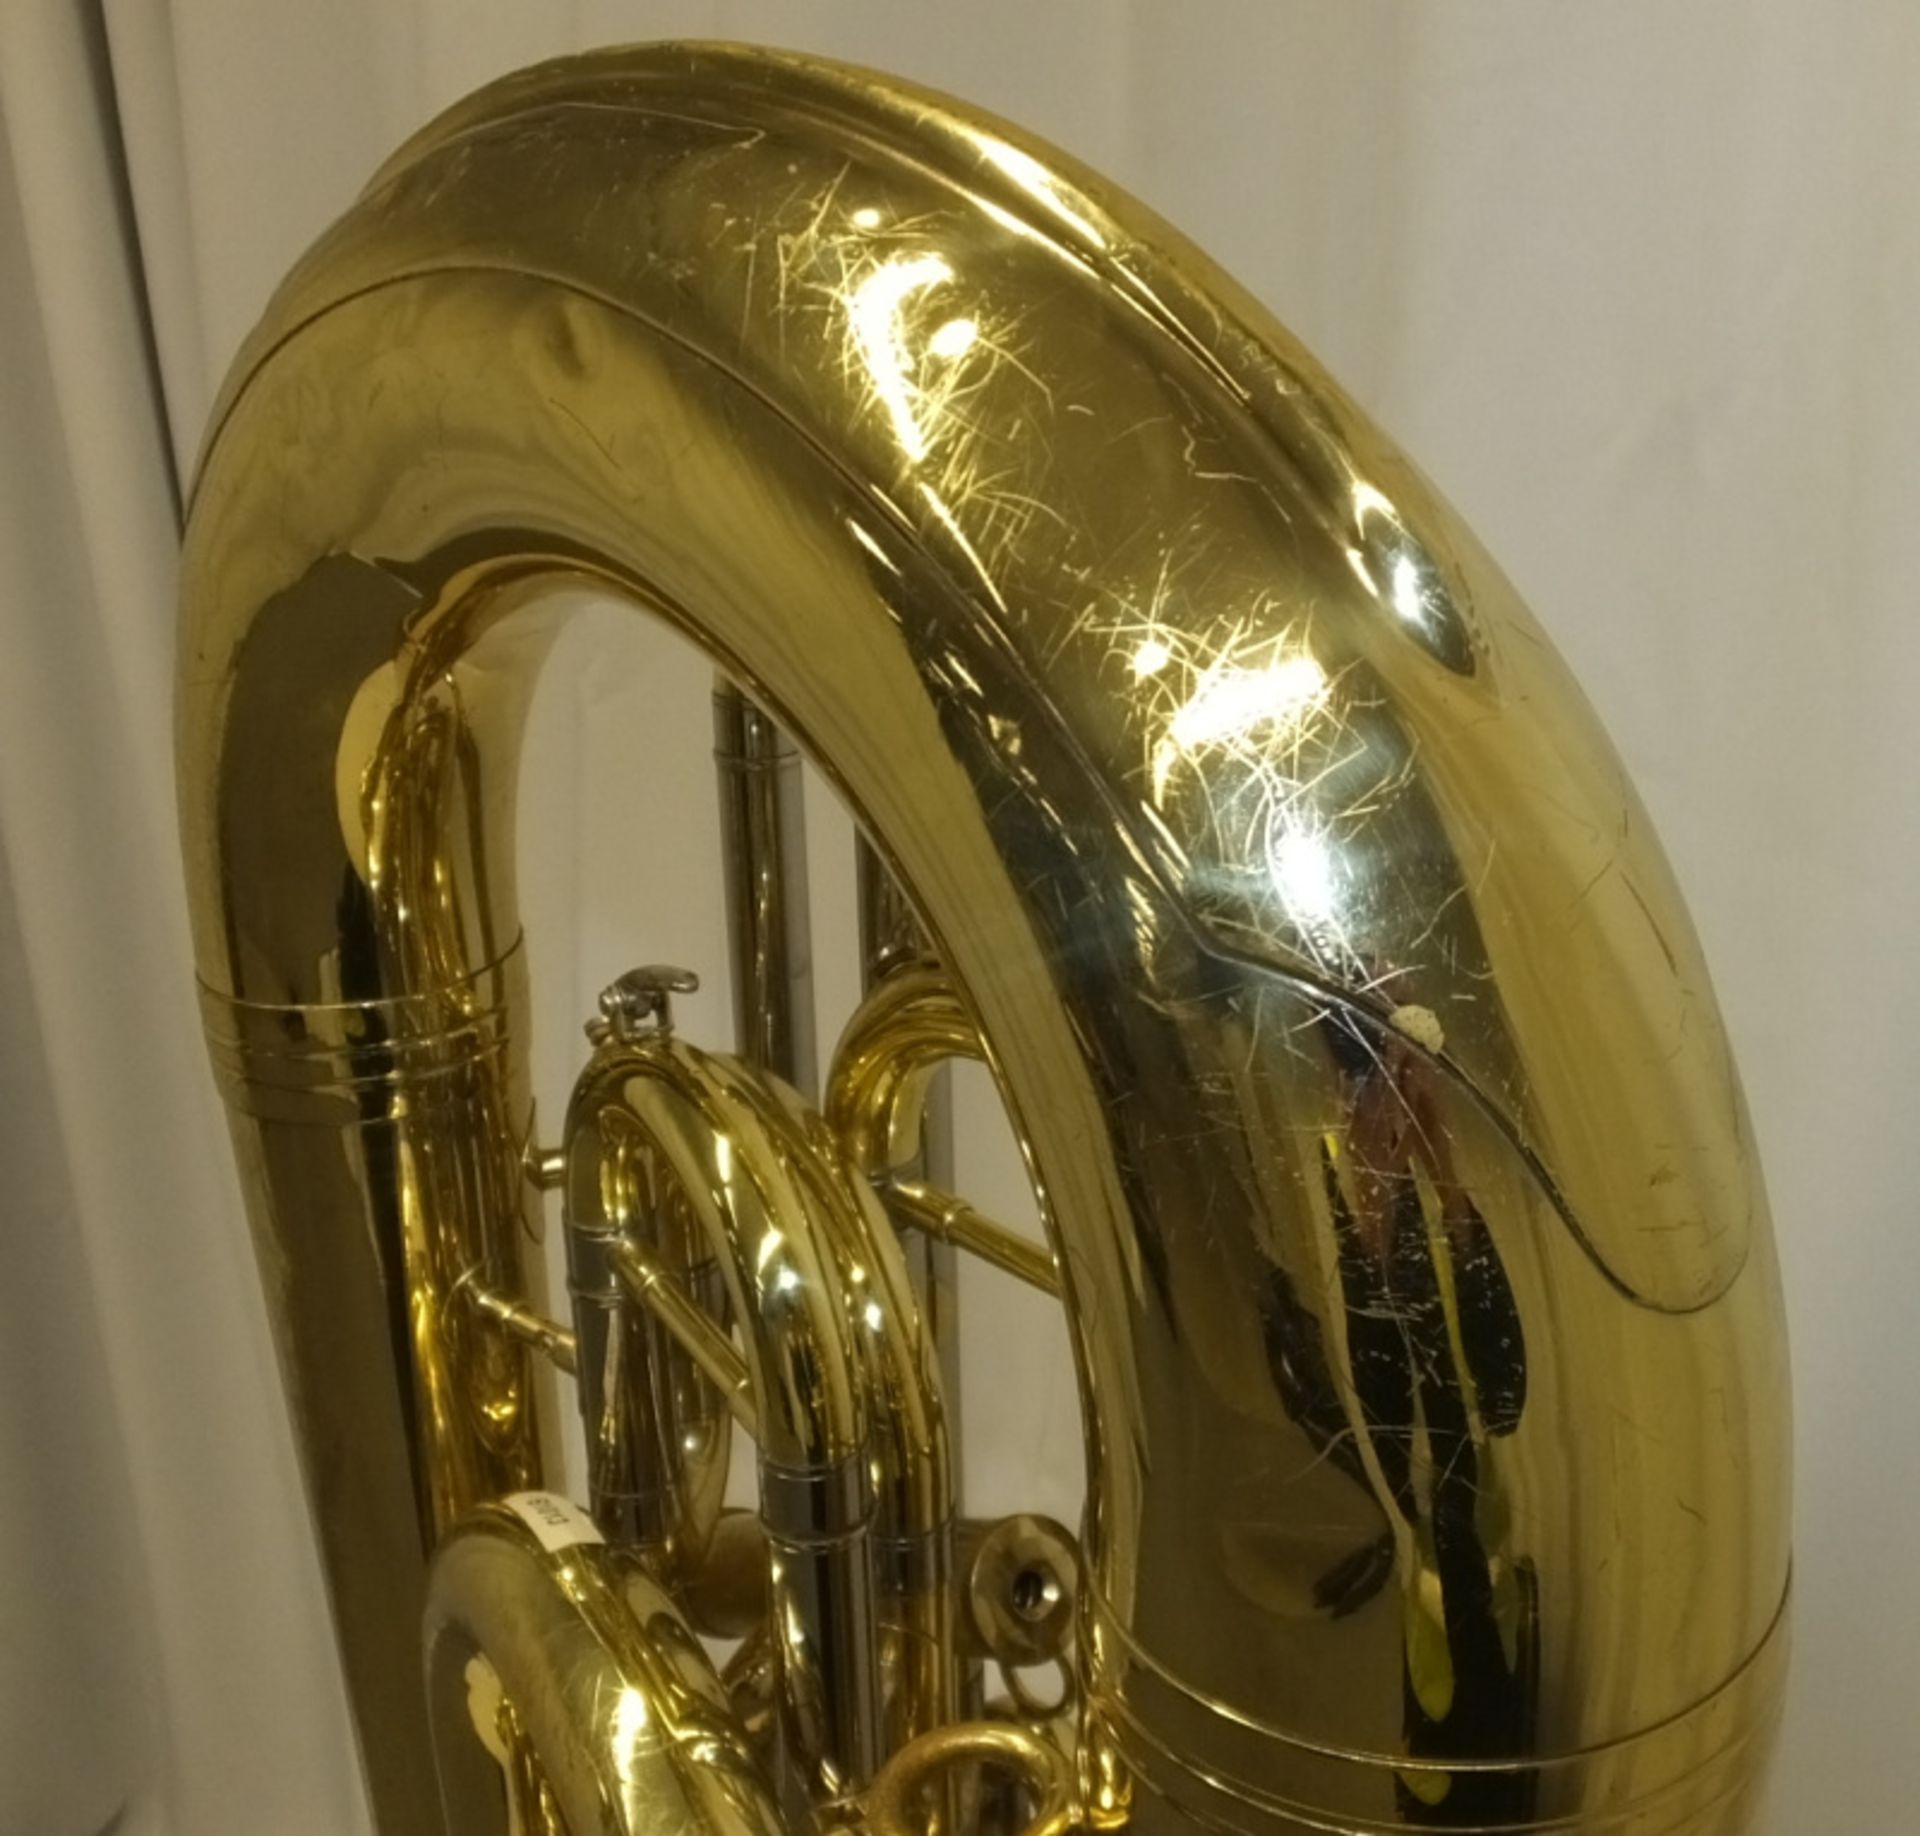 Yamaha YEB631 Tuba with 2x Denis Wick mouthpieces in case - Serial number 100357 - Image 14 of 23